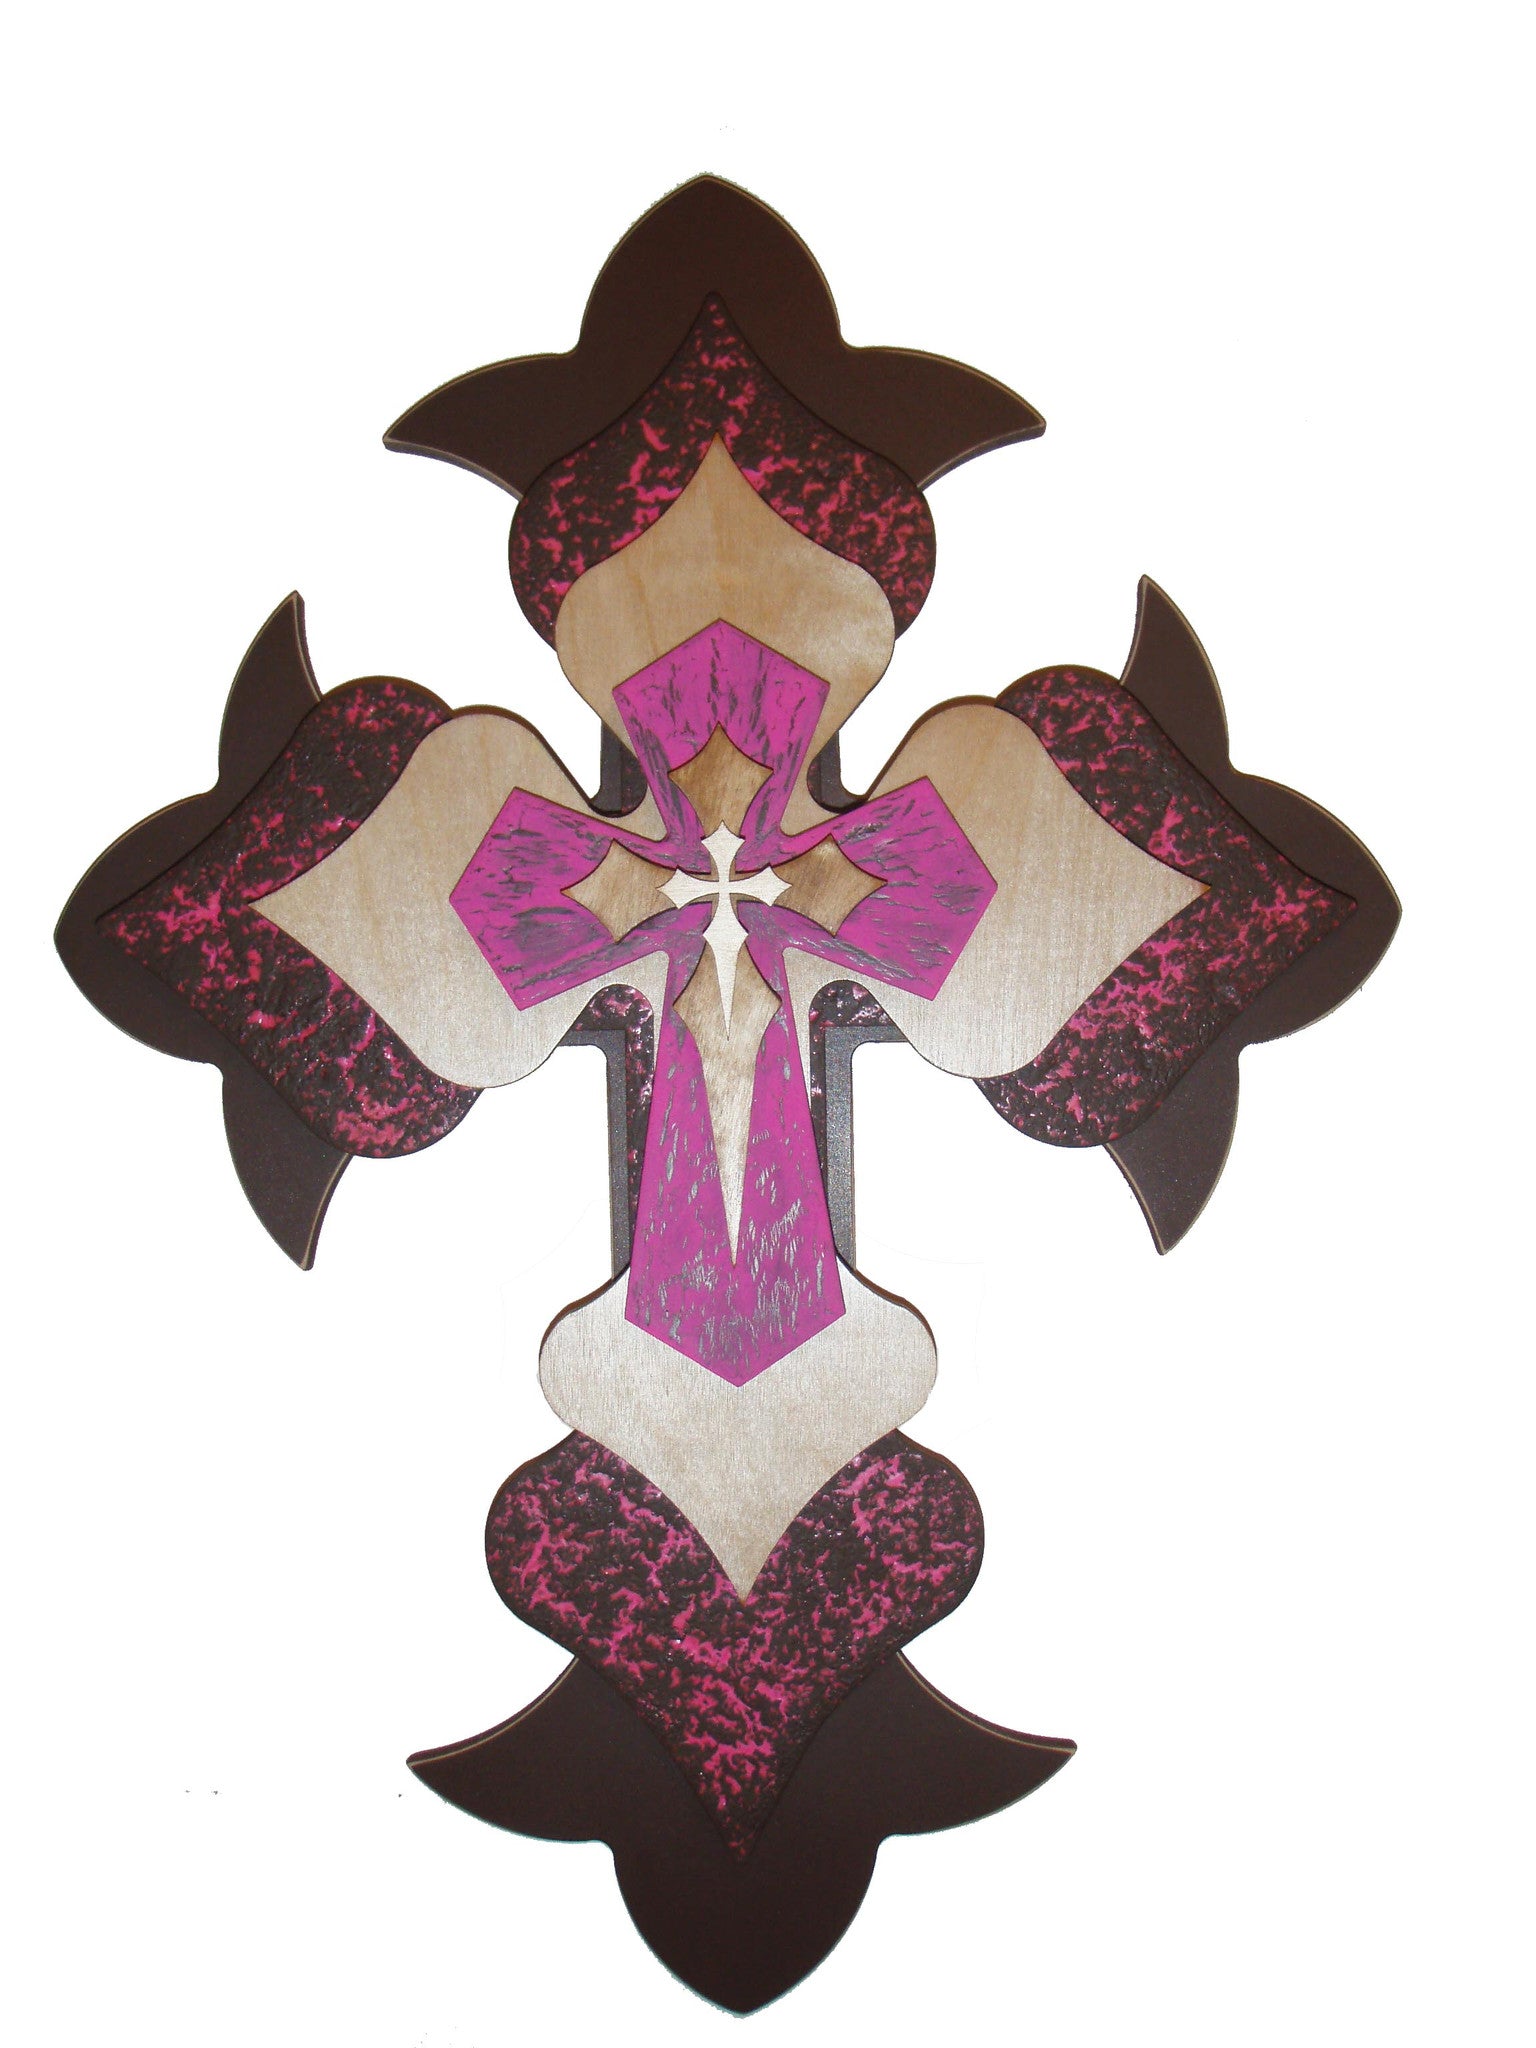 Decorative Wall Cross by Artistic Craft Supply